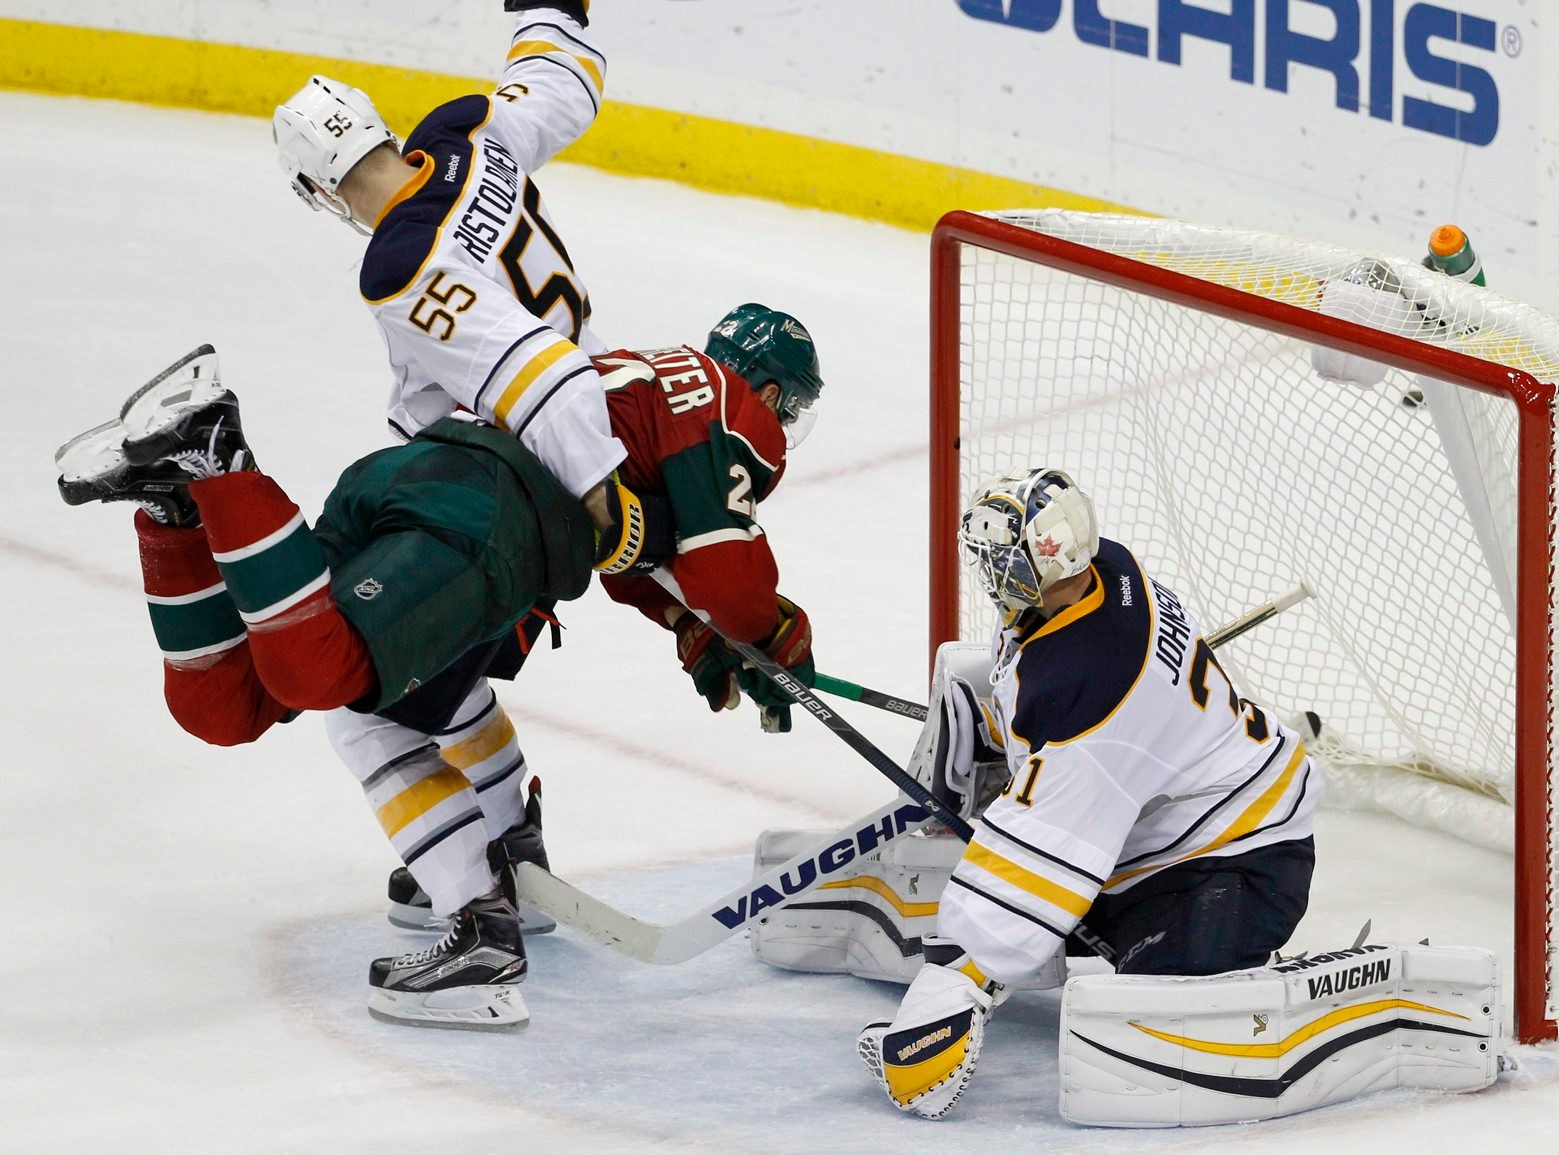 Buffalo Sabres defenseman Rasmus Ristolainen (55), of Finland, holds Minnesota Wild right wing Nino Niederreiter, of Switzerland, after a shot by Niederreiter went wide past Sabres goalie Chad Johnson, right during a test of 3-on-3 overtime play after an NHL preseason hockey game in St. Paul, Minn., Thursday, Oct. 1, 2015. The Wild won 6-1. (AP Photo/Ann Heisenfelt) Sabres Wild Hockey